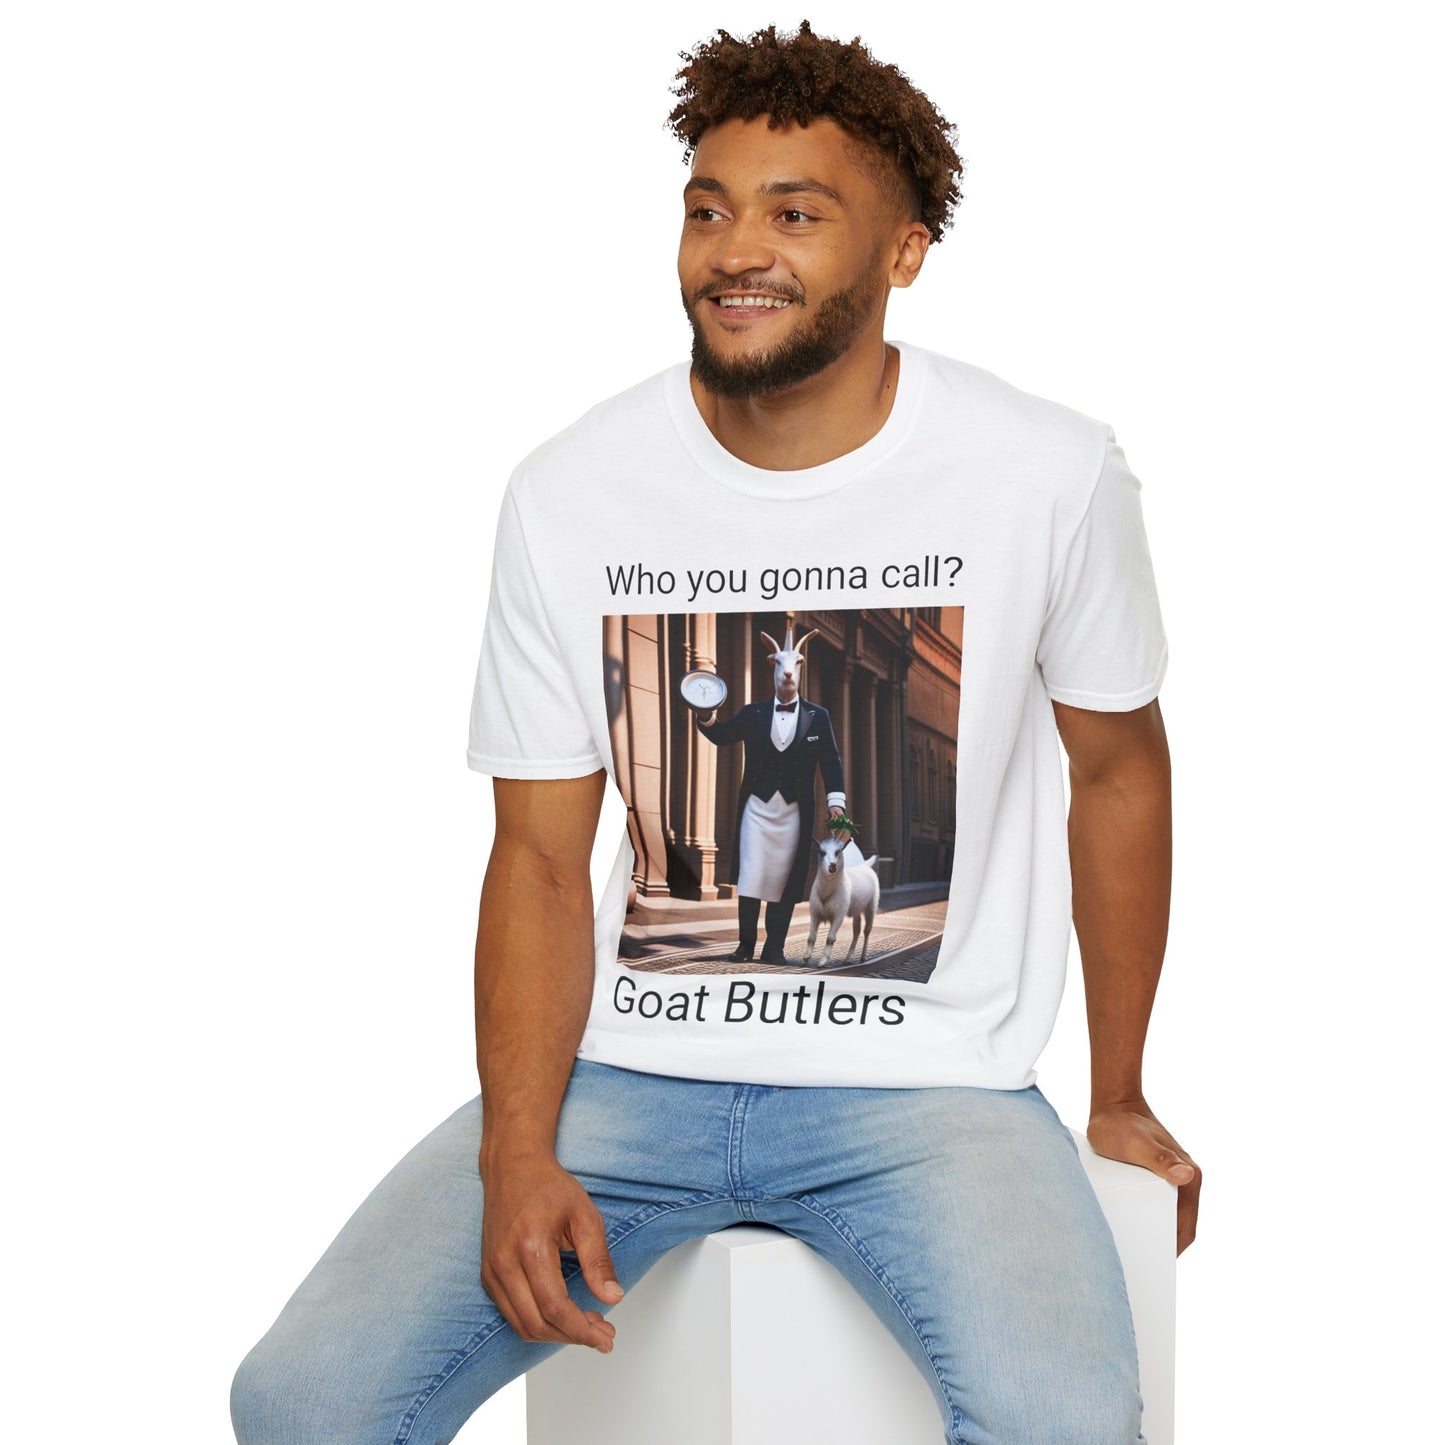 Goat Butlers t shirt